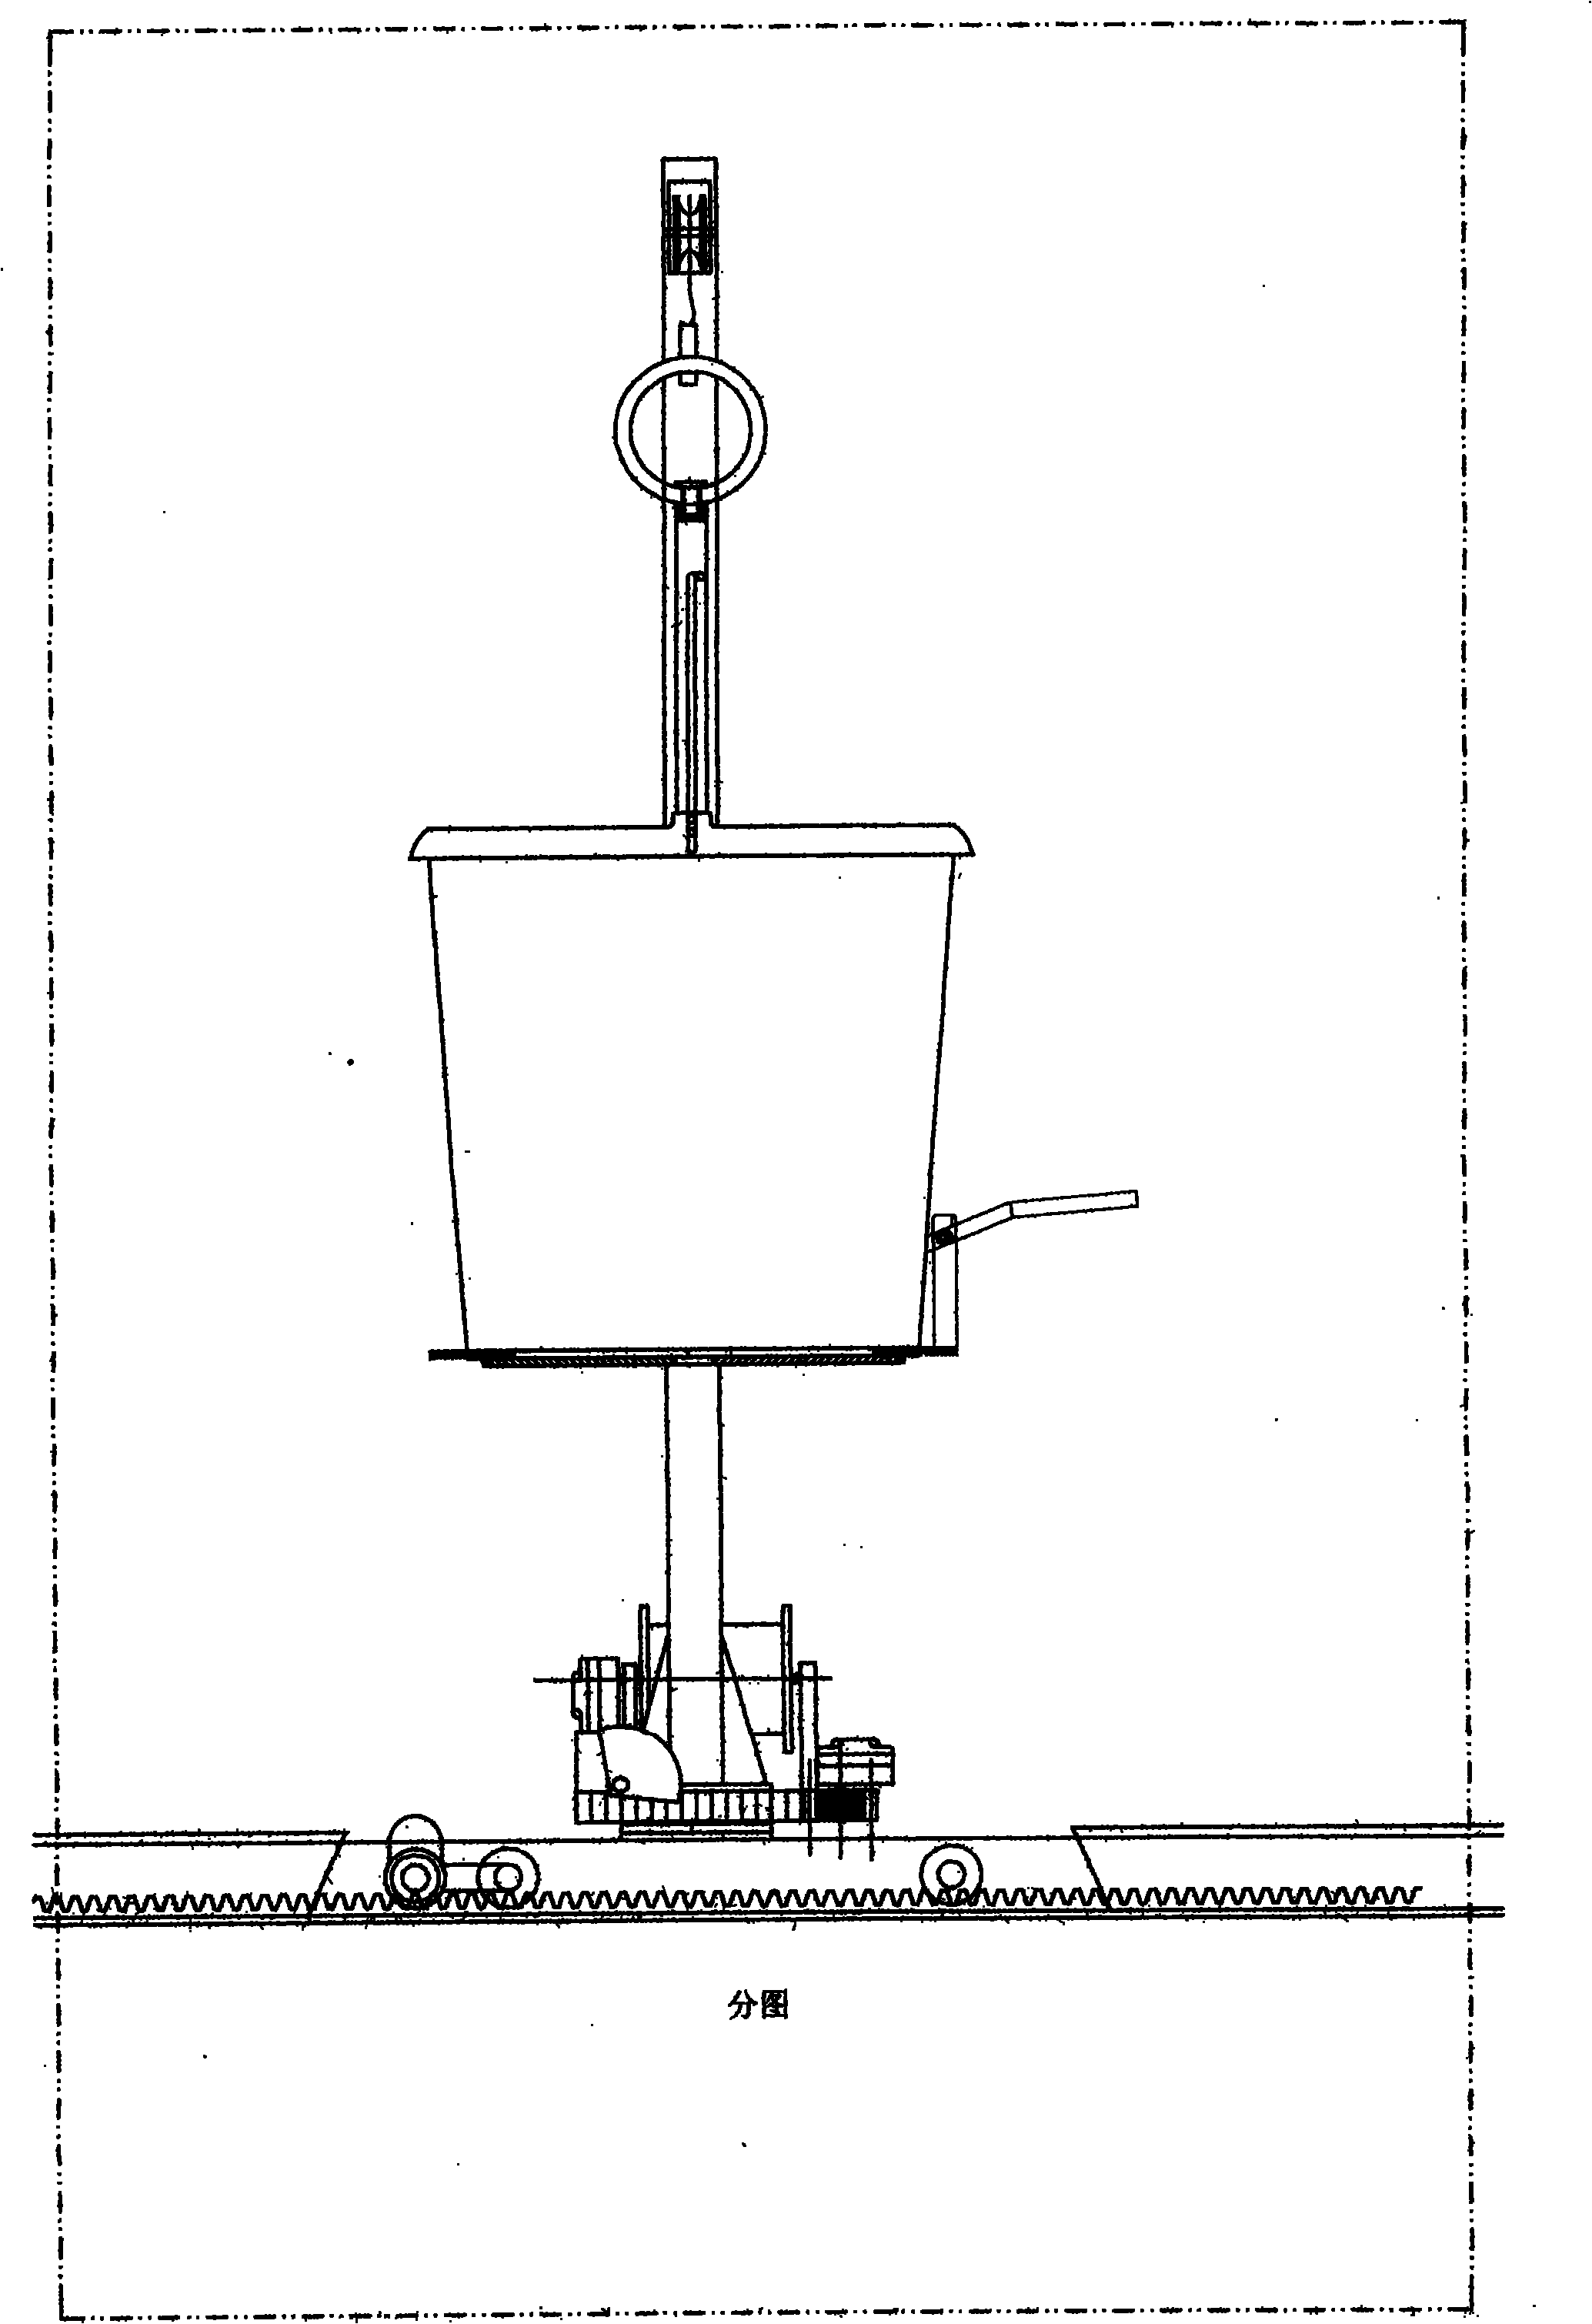 Method and equipment for collecting, hoisting, compacting and transporting refuse